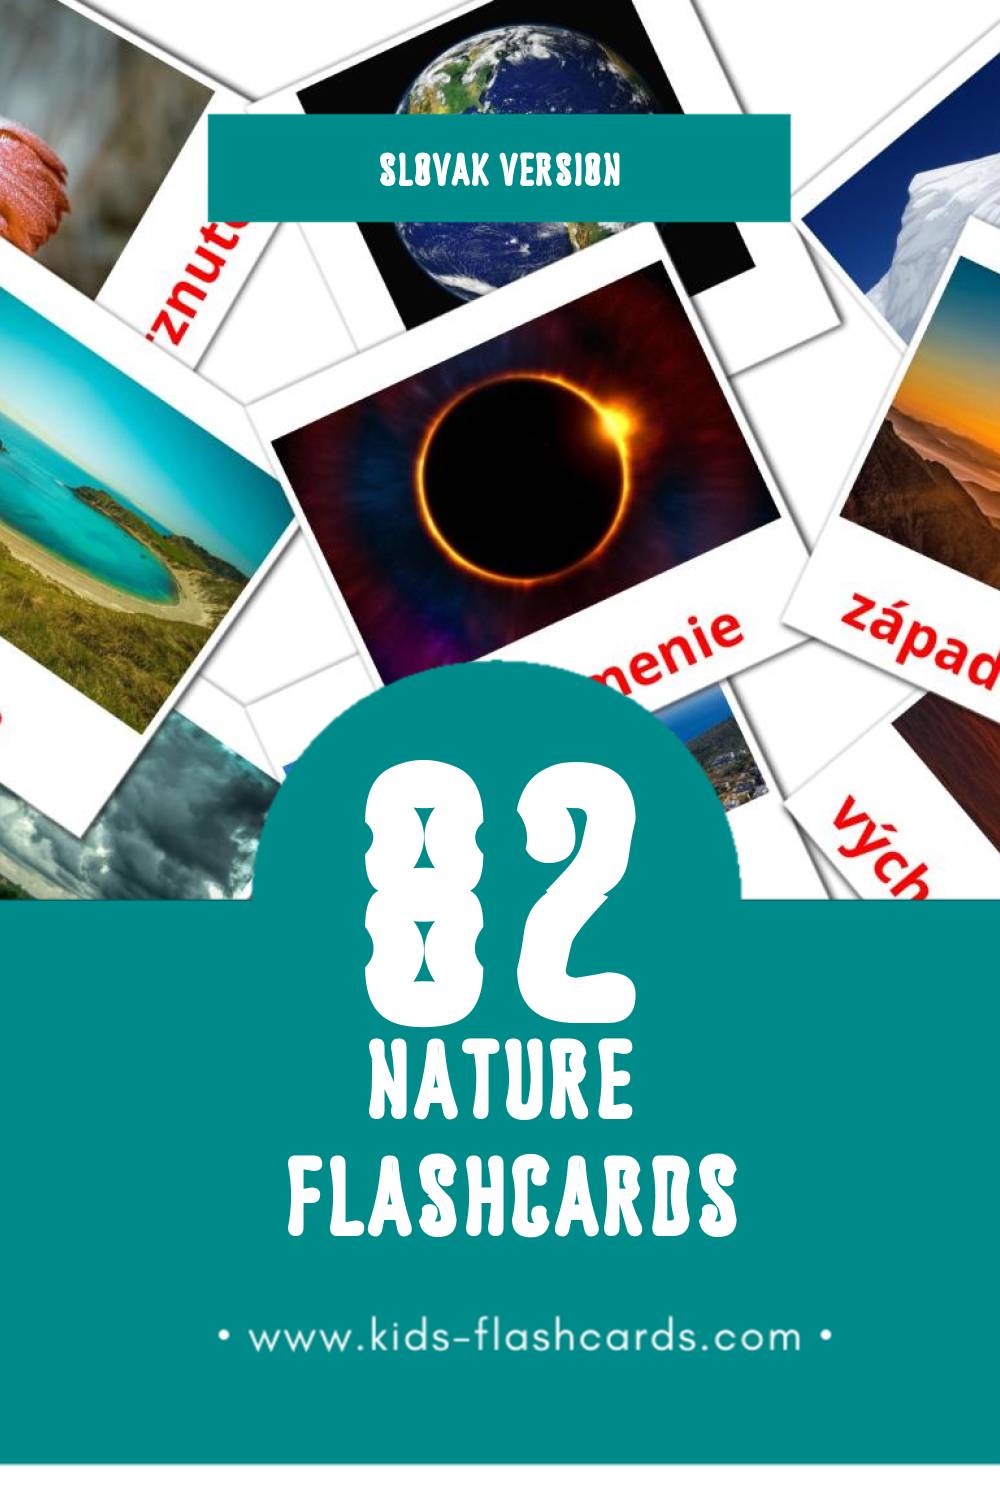 51-free-nature-flashcards-in-slovak-pdf-files